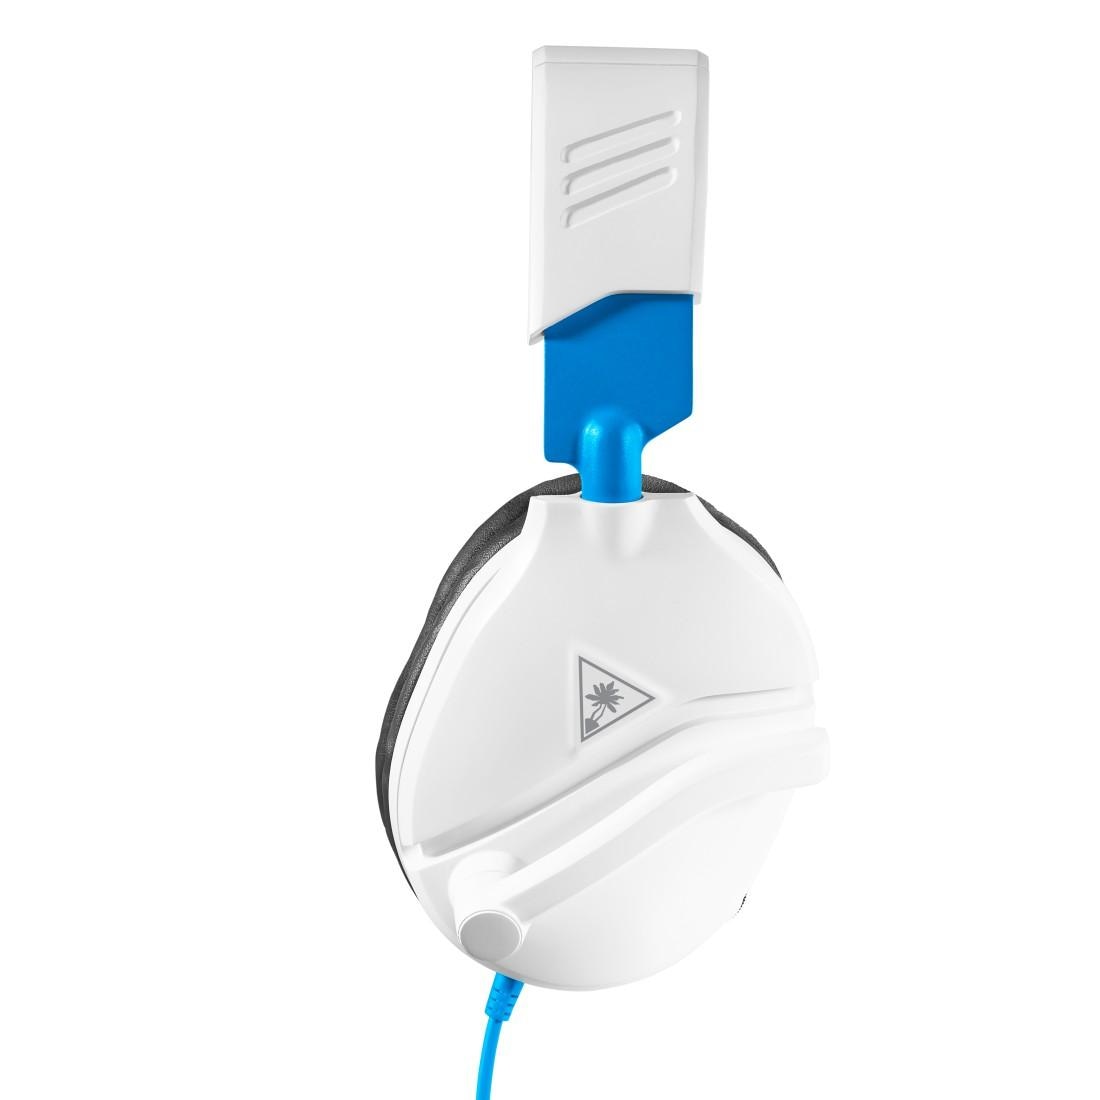 Turtle Beach Gaming-Headset »Recon 70P«